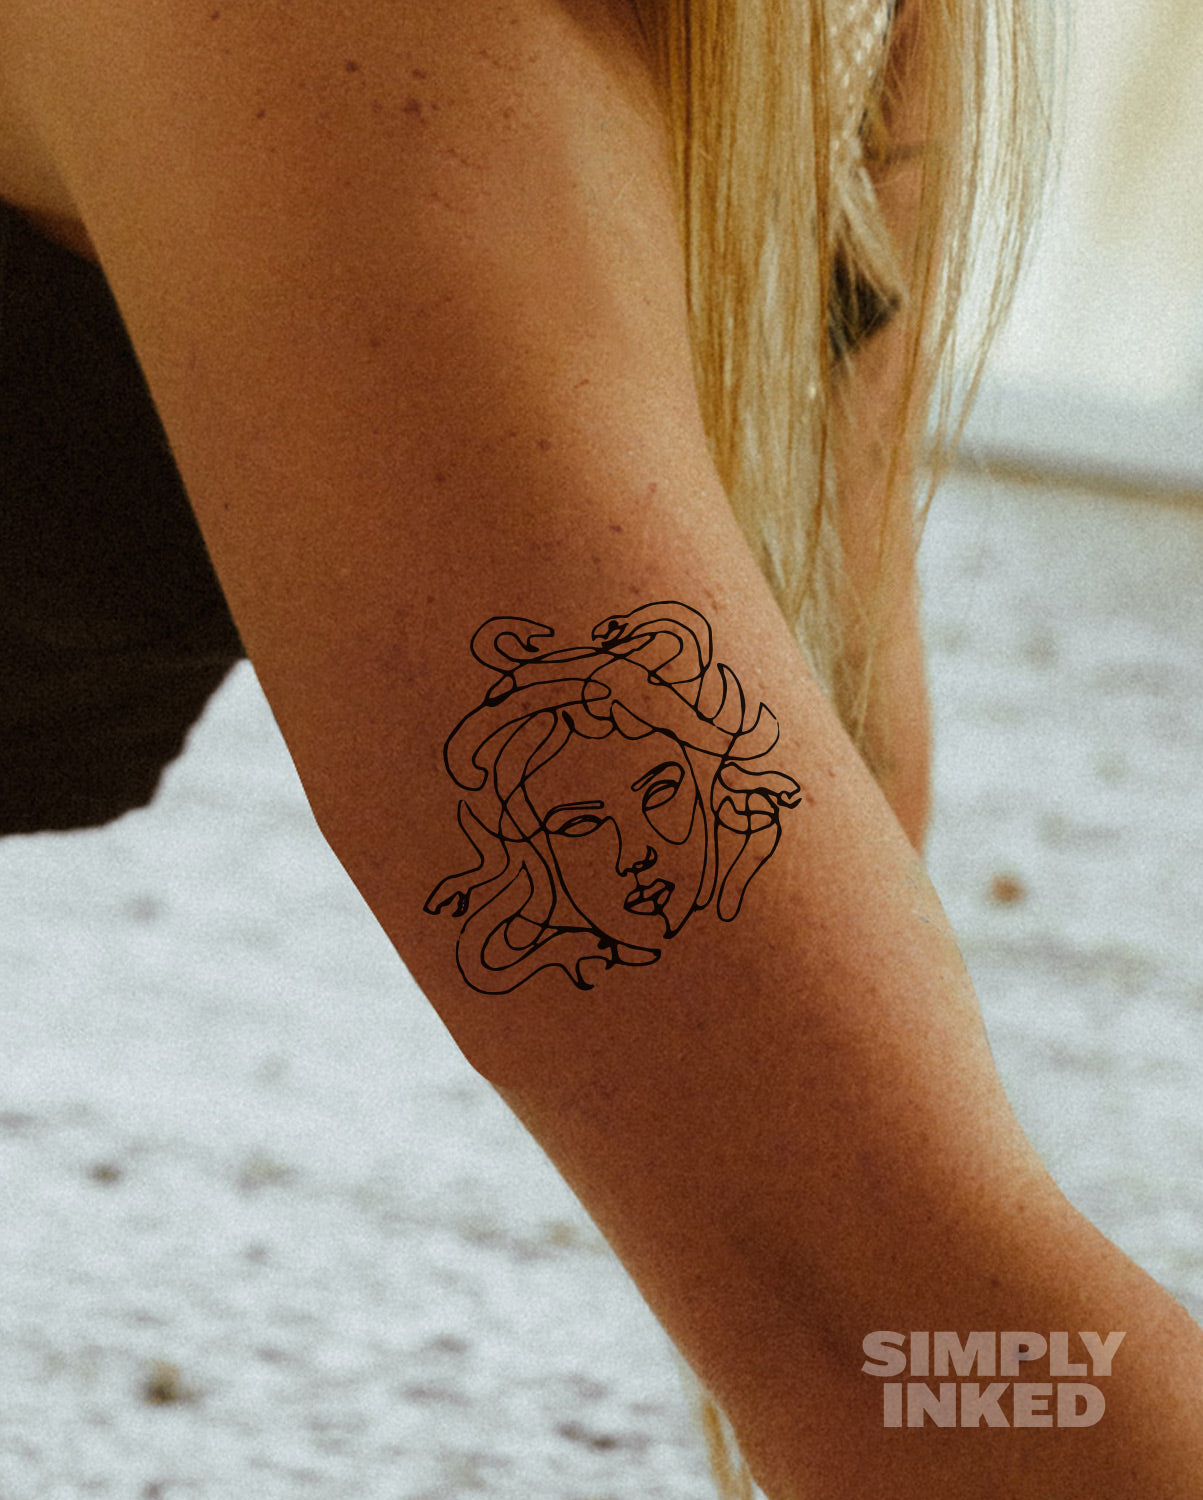 Medusa Tattoo - Tiny & Delicate! How cool is it that she... | Facebook